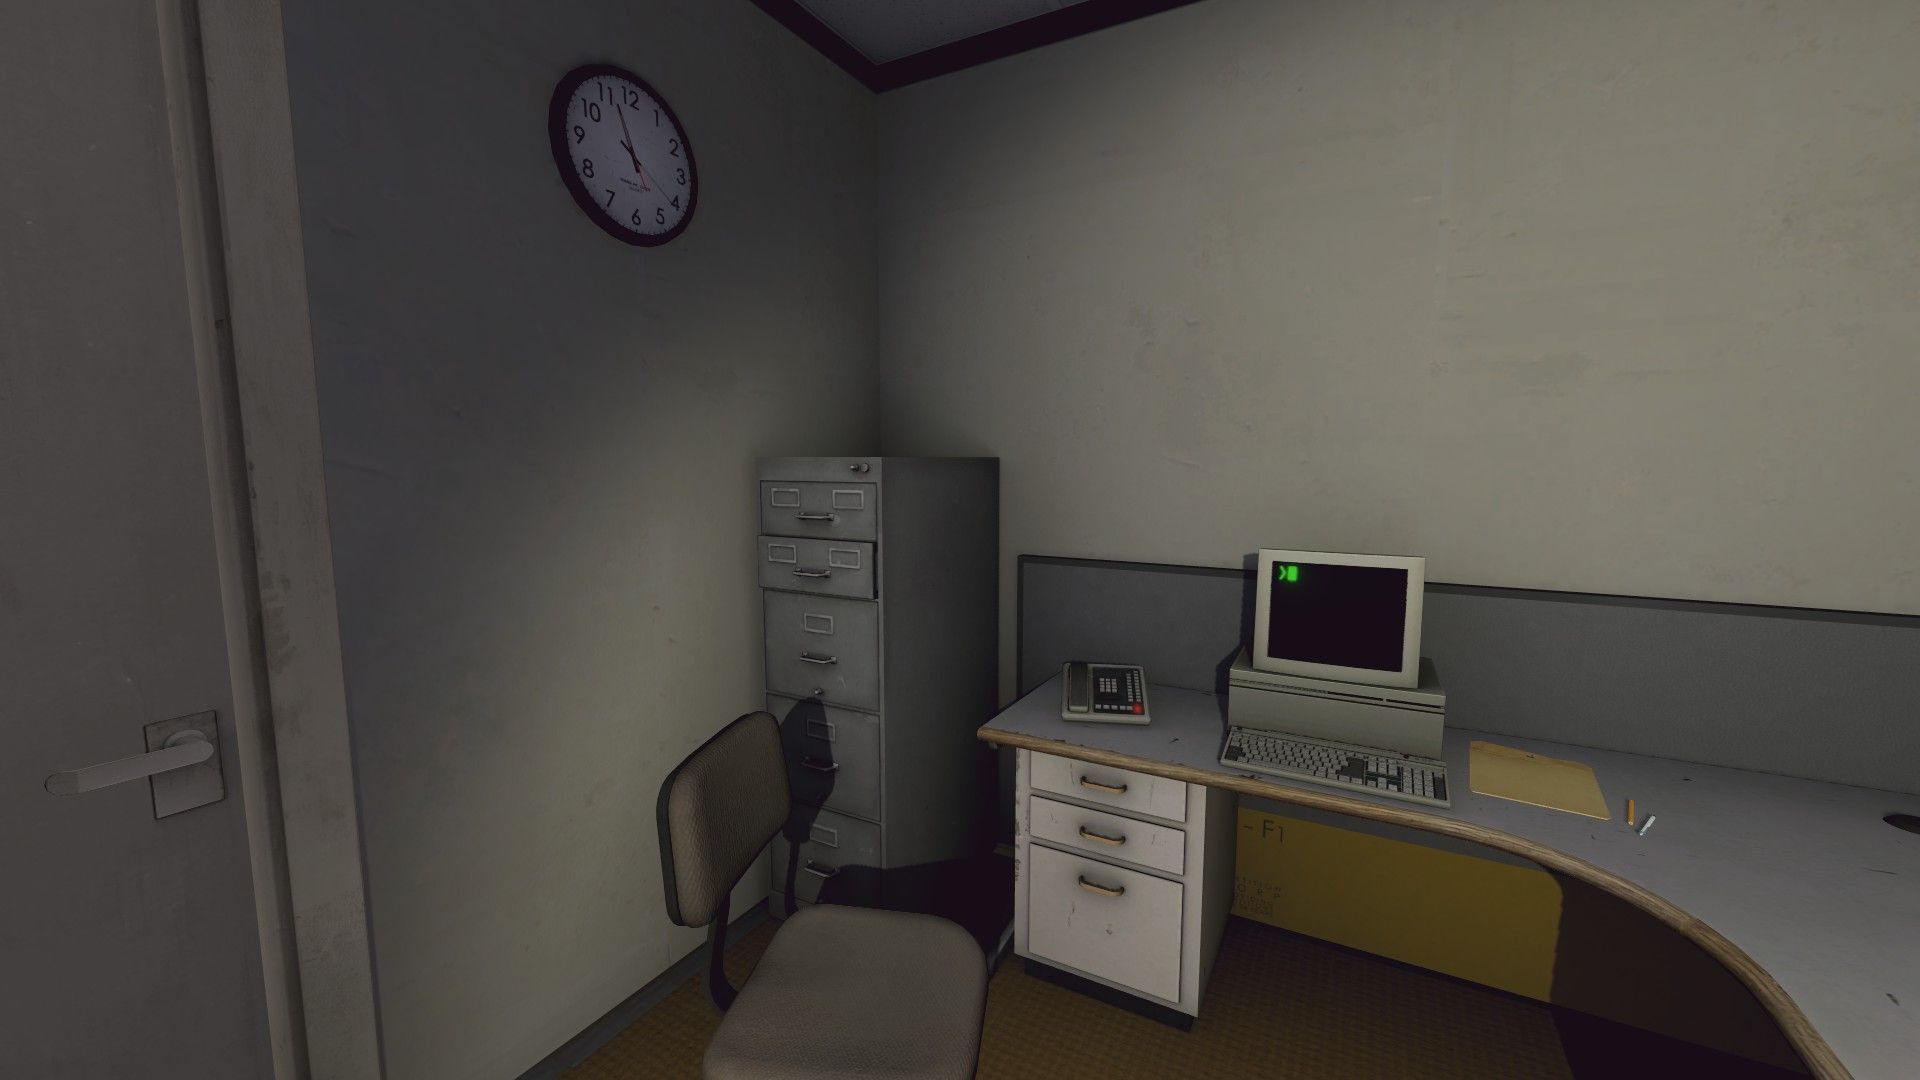 What is The Stanley Parable?